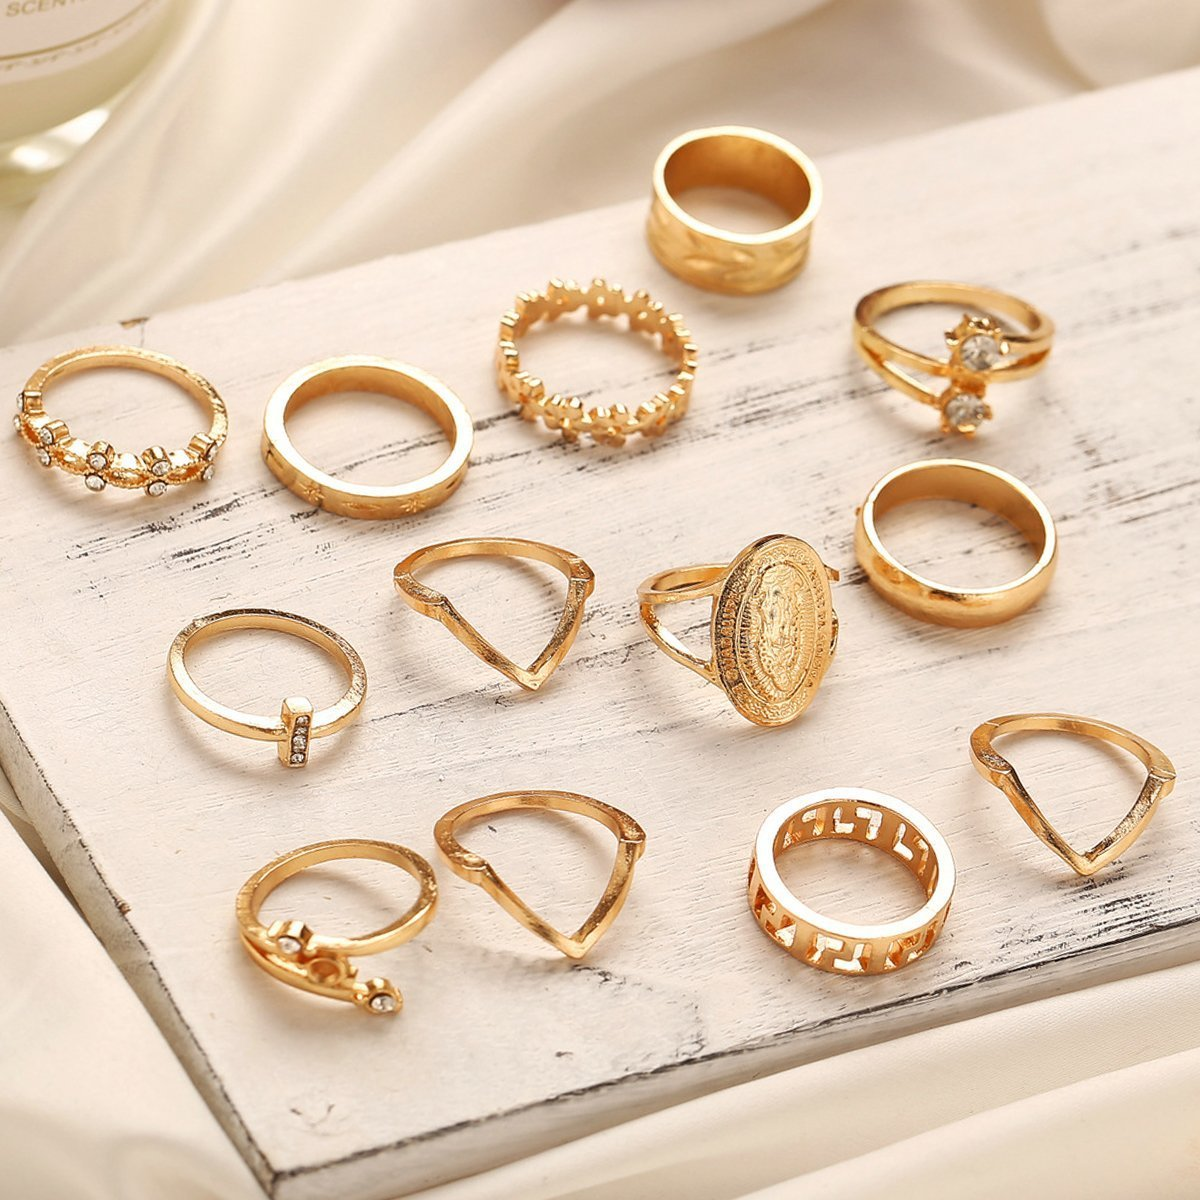 13 Piece Medallion Ring Set With Austrian Crystals 18K Gold Plated Ring ITALY Design - Better Life